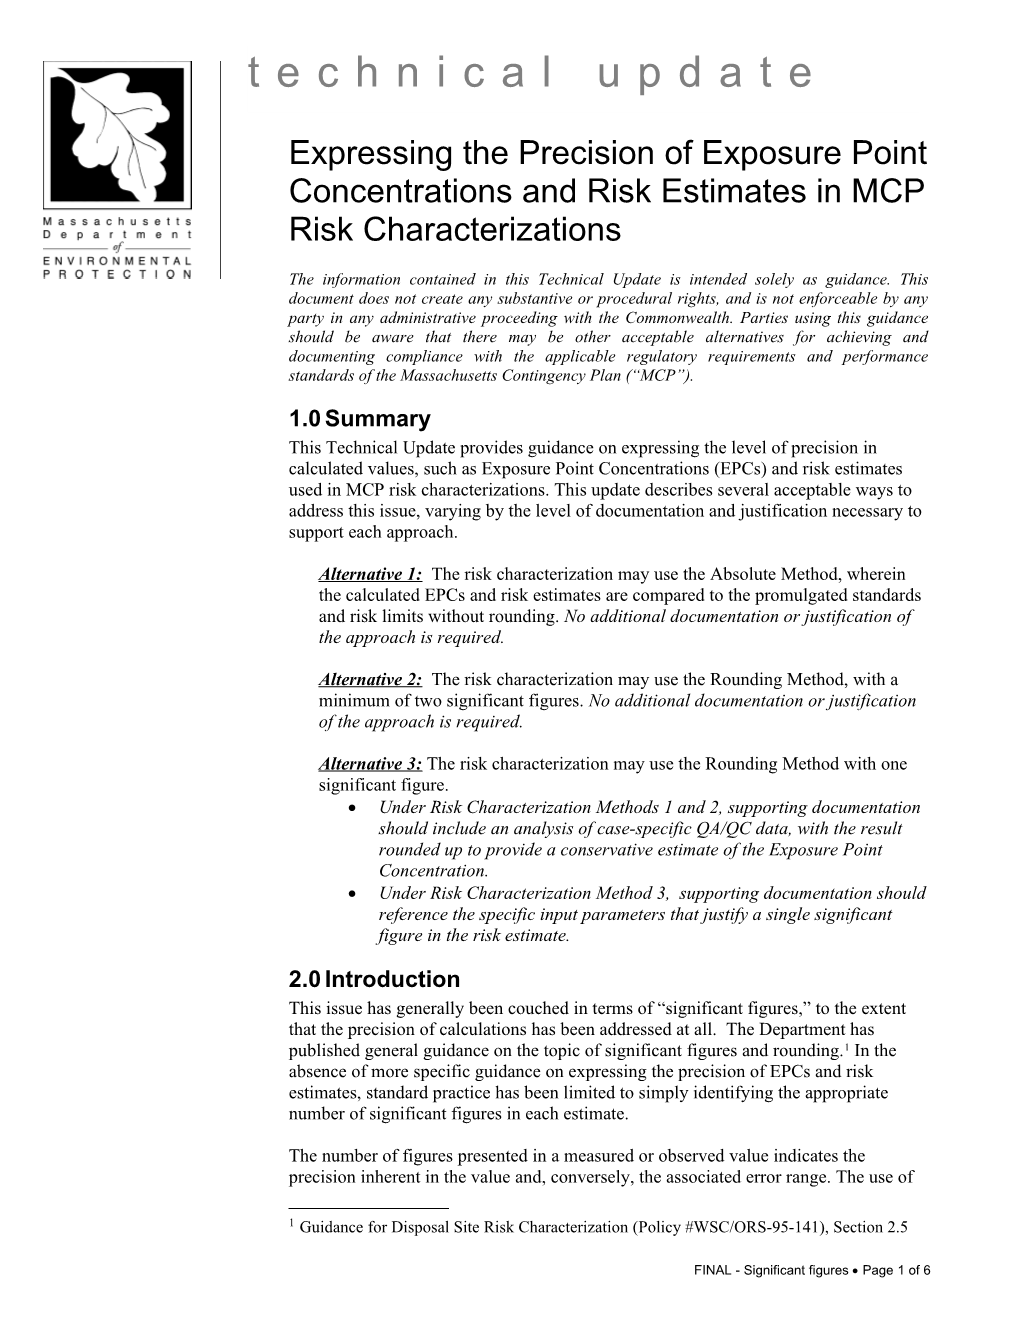 Expressing the Precision of Exposure Point Concentrations and Risk Estimates in MCP Risk